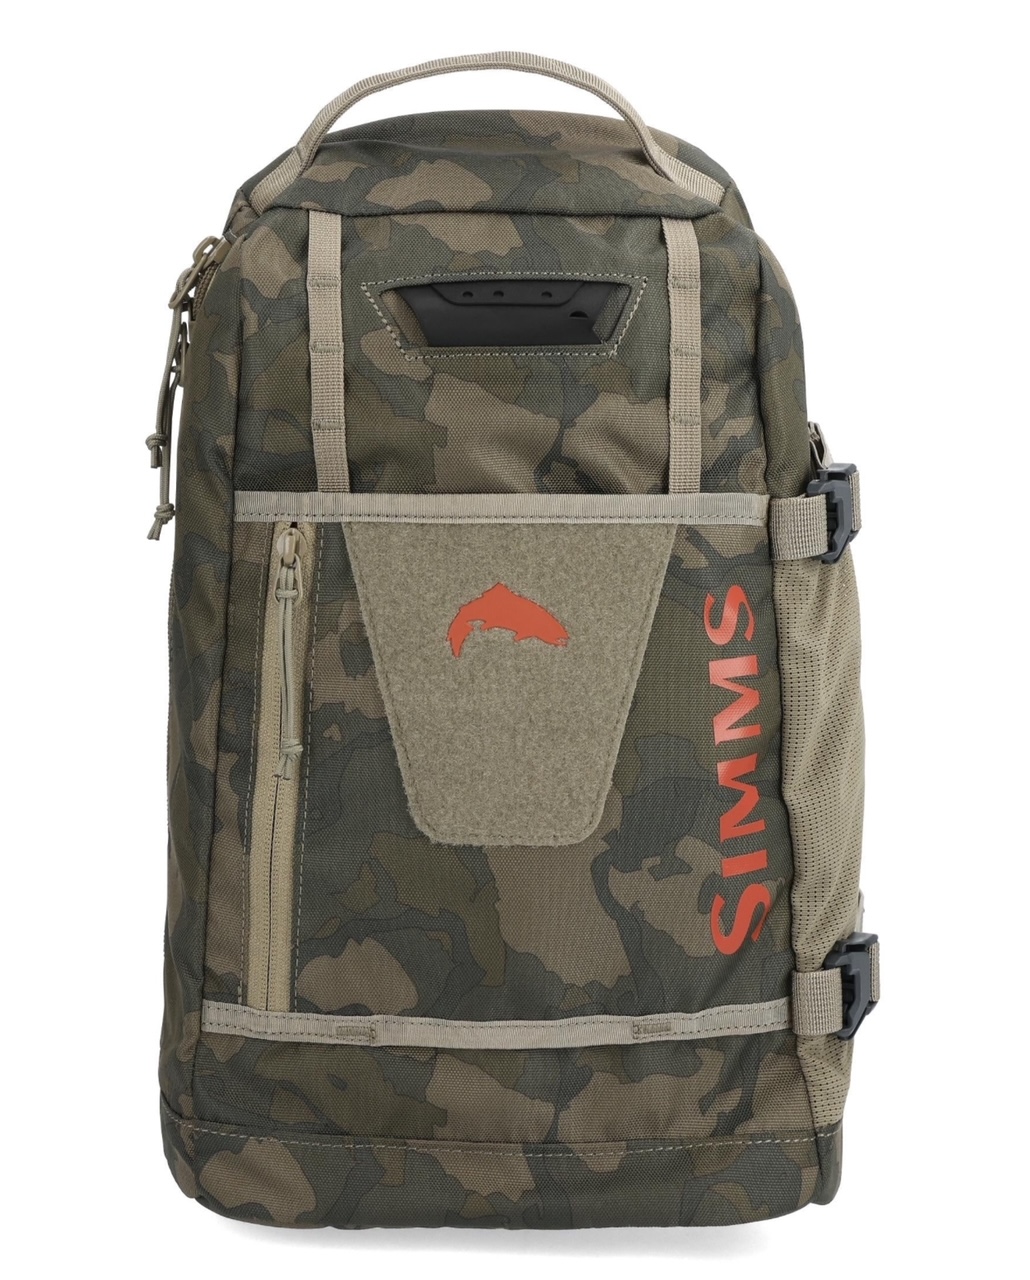 Simms Tributary Sling Pack - Regiment Camo Olive Drab